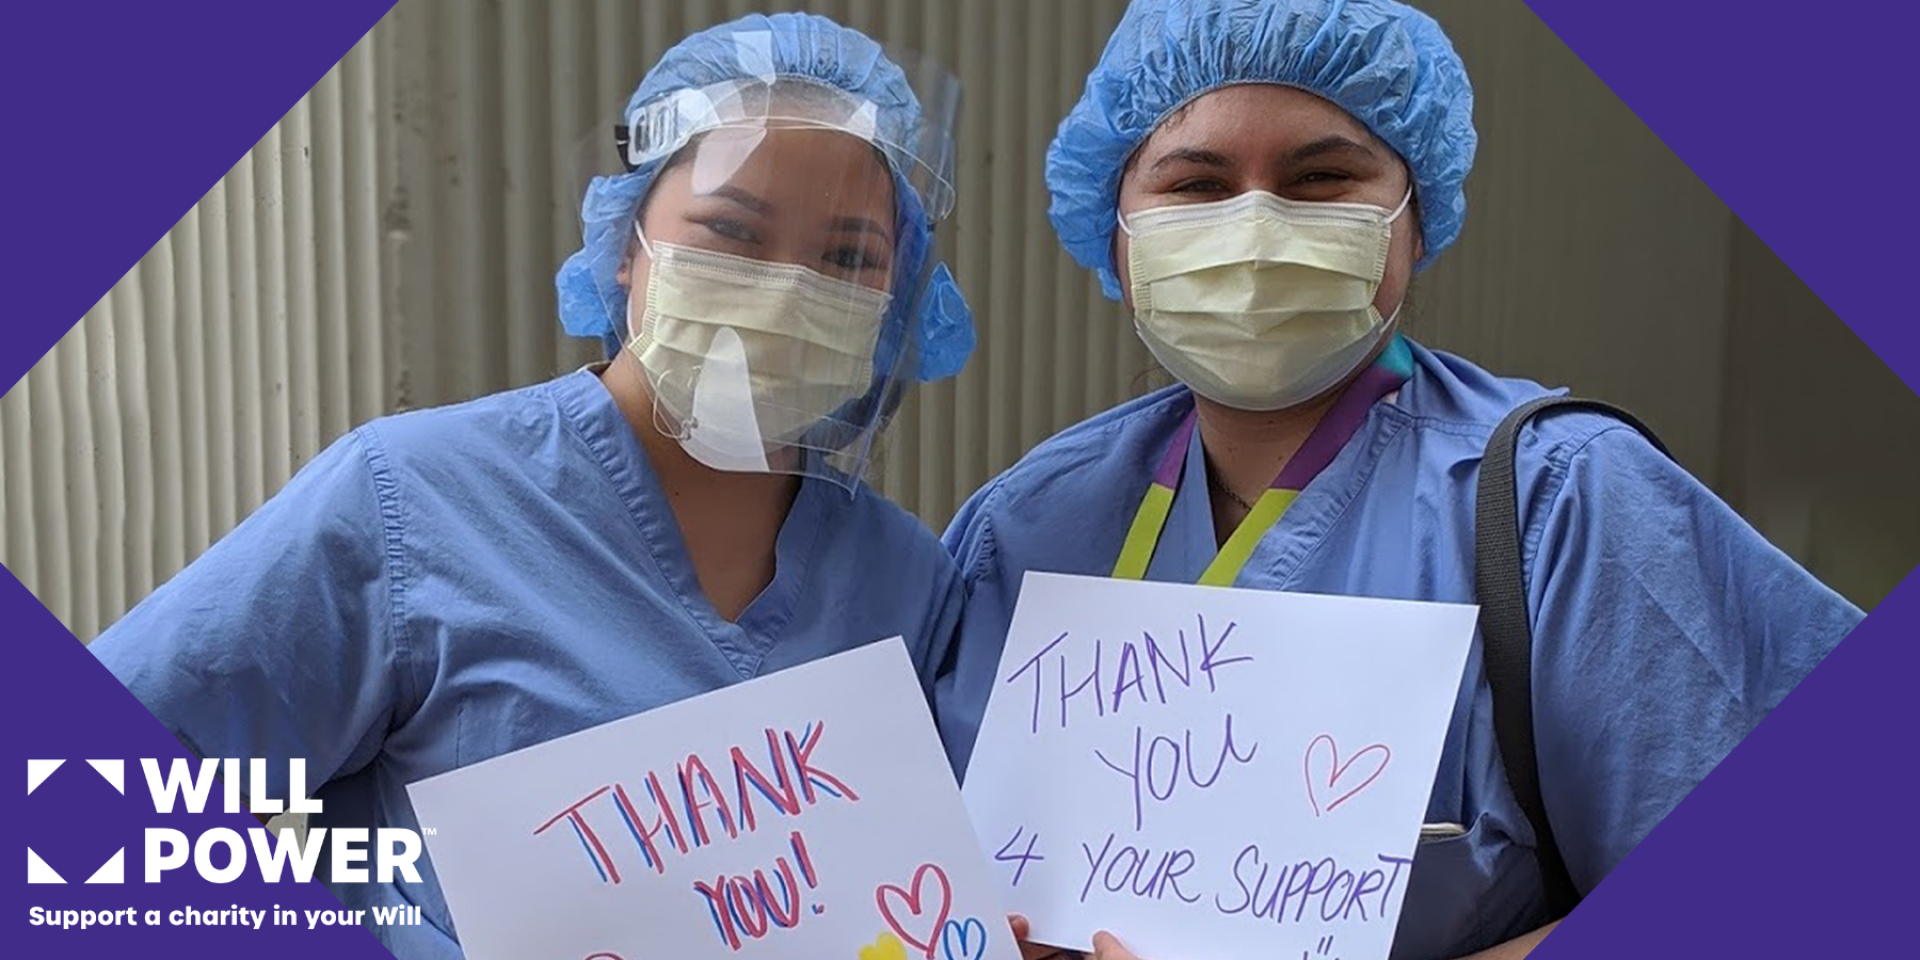 Tow nurses holding hand made thank you signs, Will Power logo on the bottom left corner